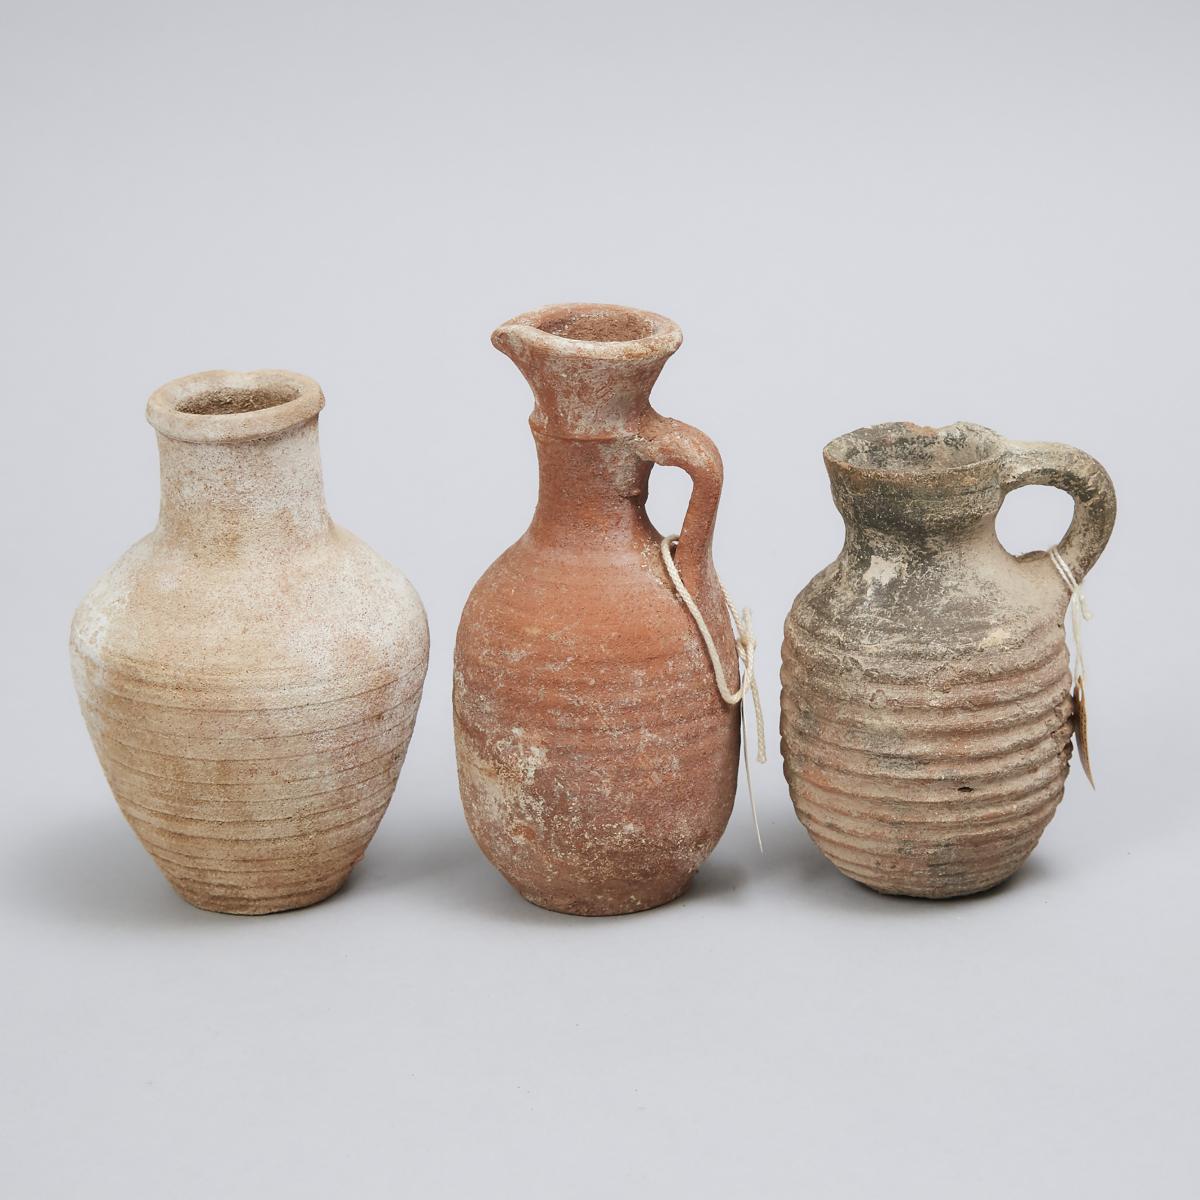 Three Pieces Roman Period Levantine-Holy Land Pottery Ribbed Pottery, 100-200 A.D., various sizes, t